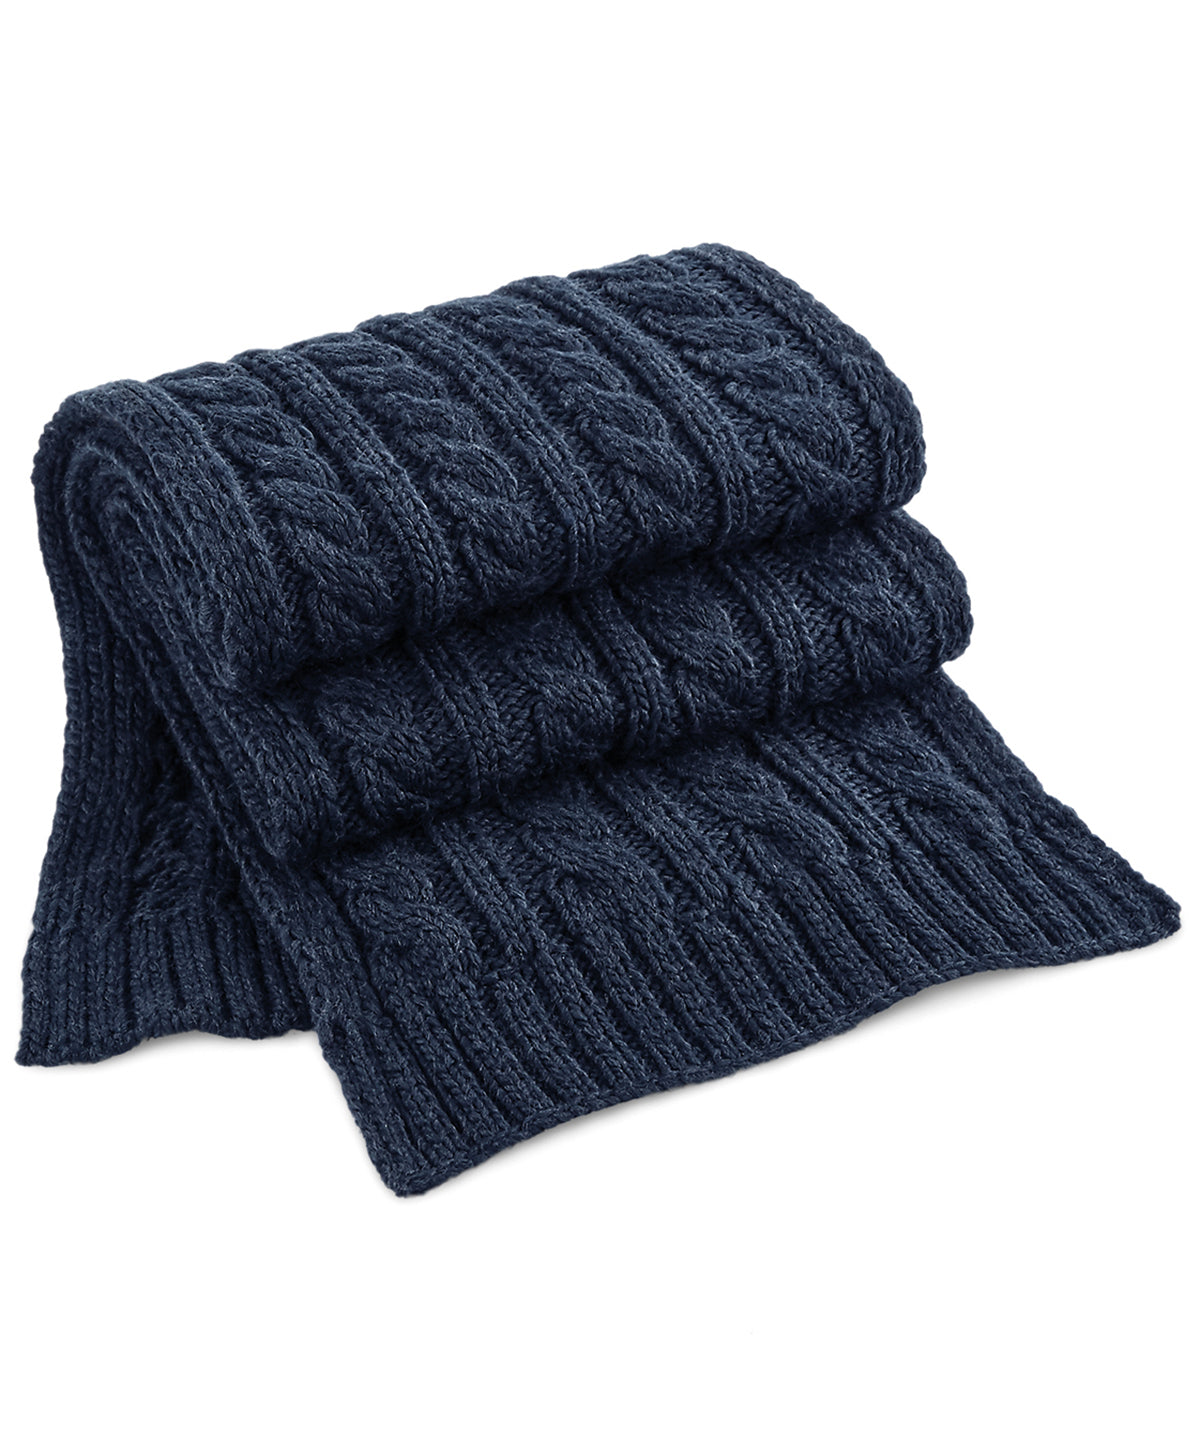 Personalised Scarves - Navy Beechfield Cable knit melange scarf